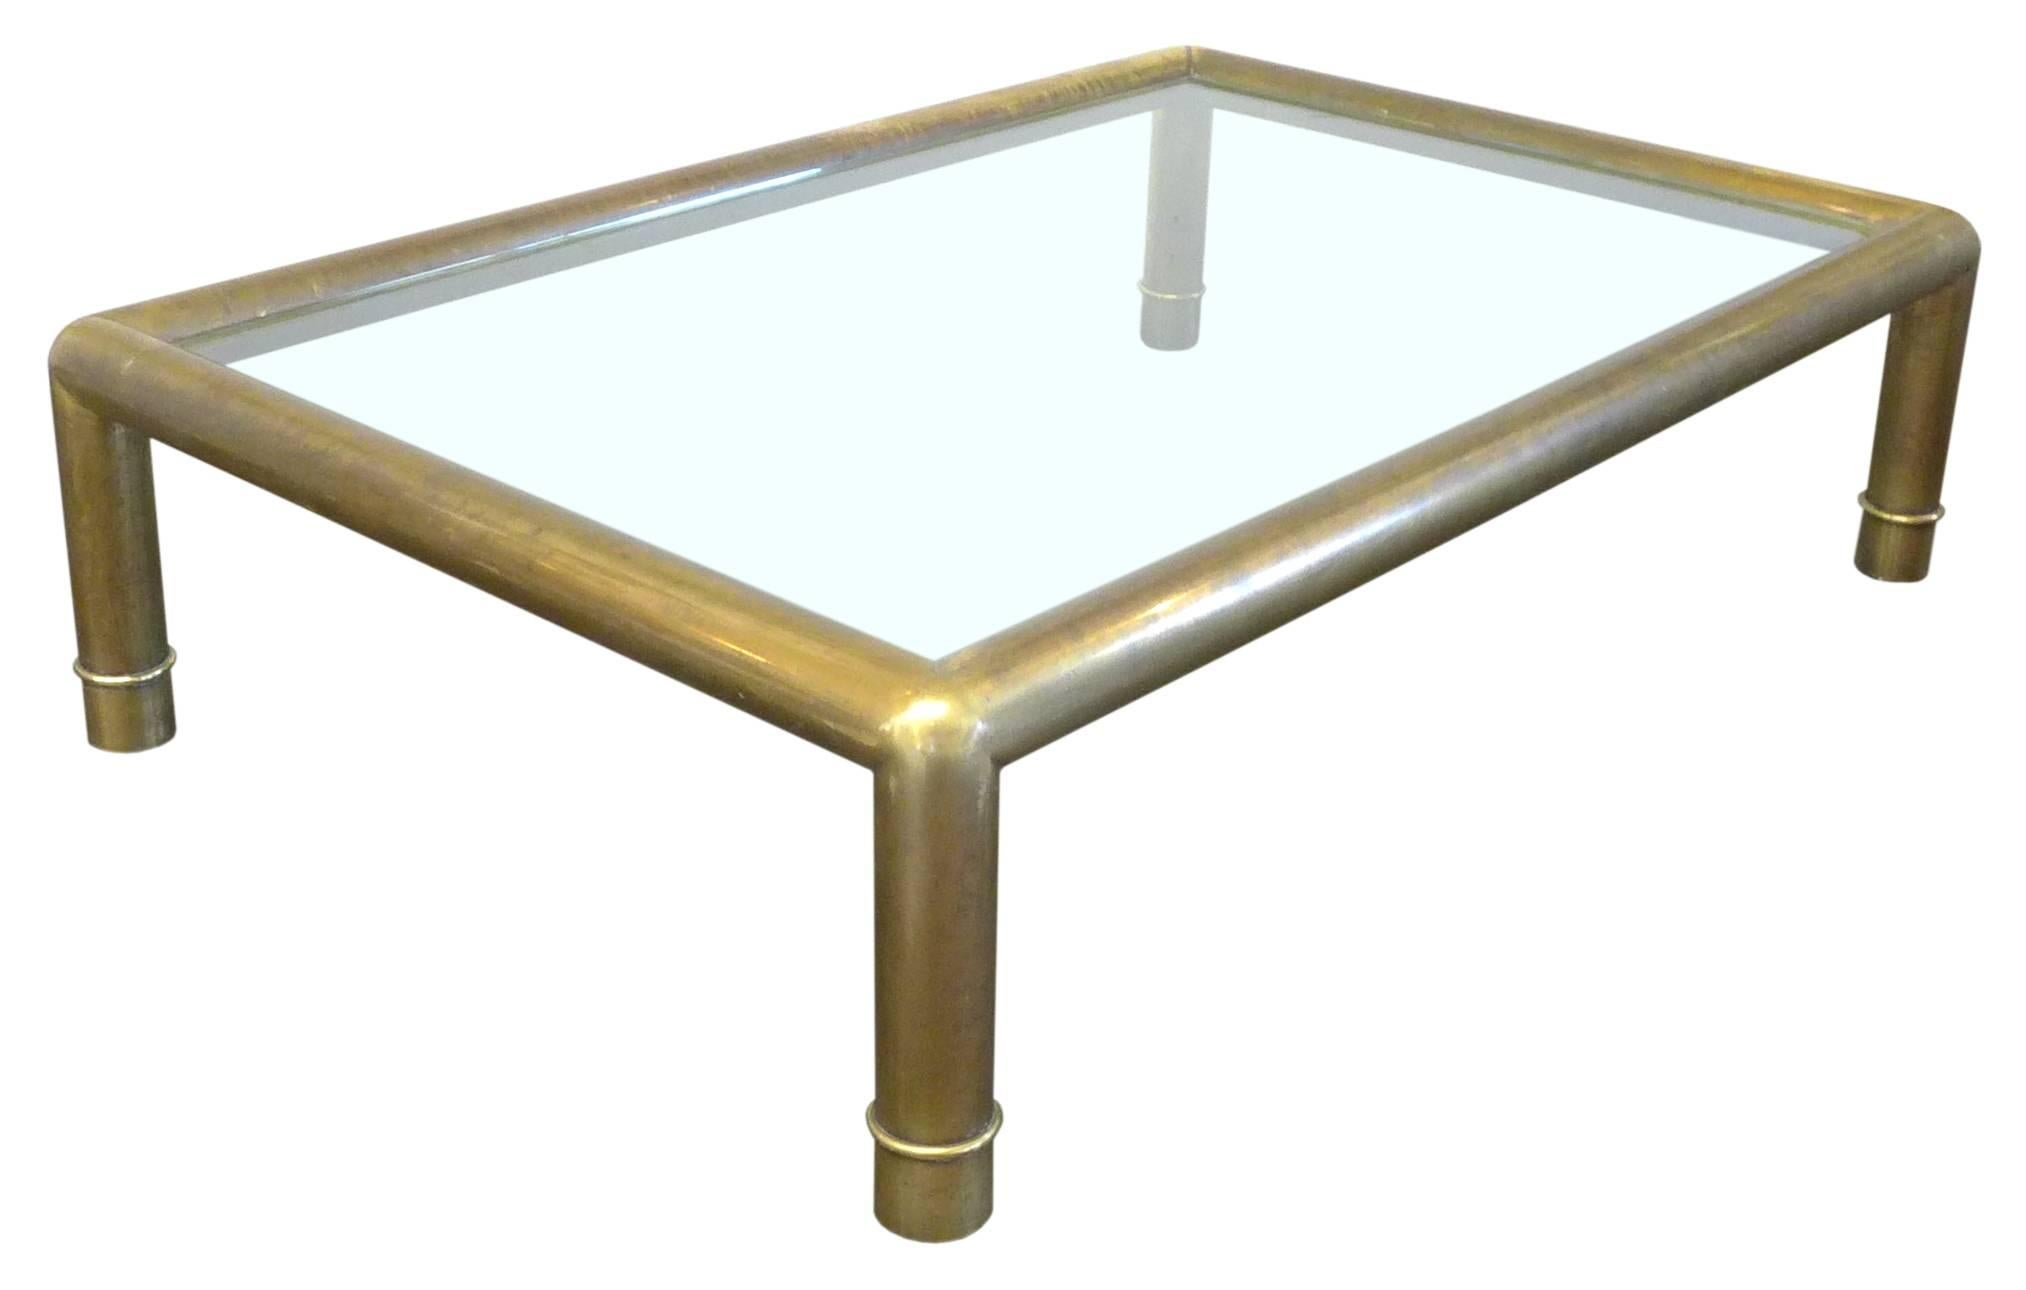 American Brass and Glass Coffee Table by Mastercraft